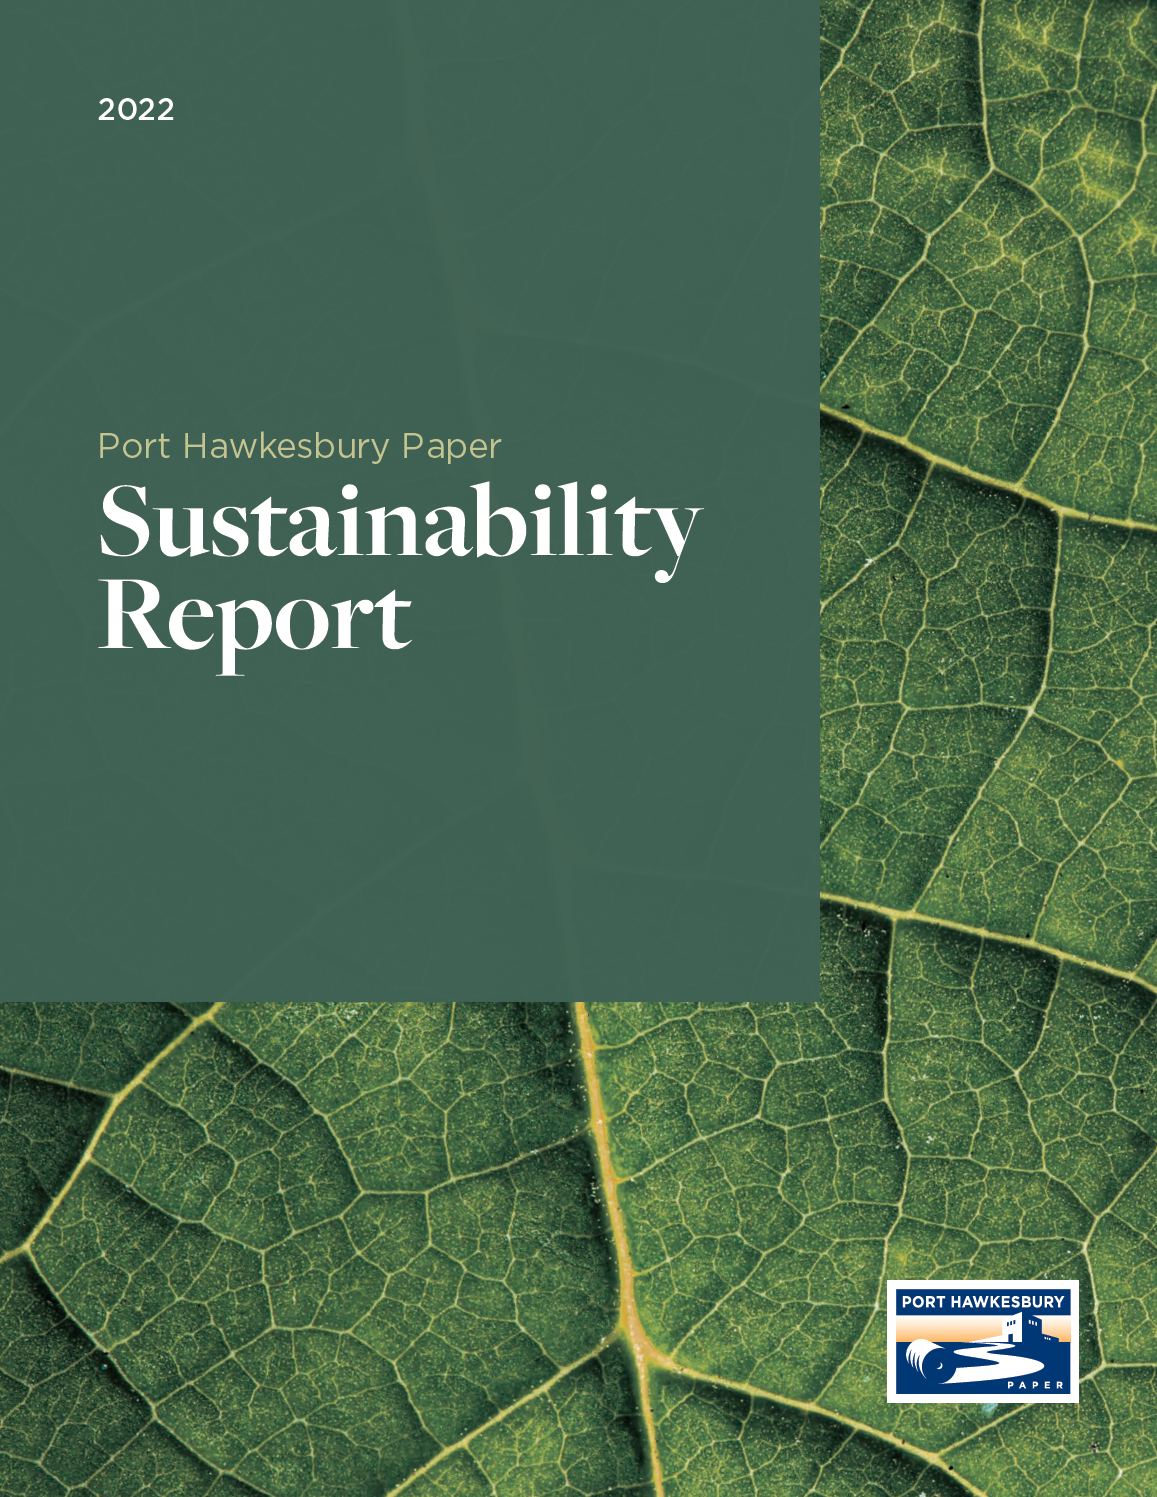 2022 Port Hawkesbury Paper Sustainability Report